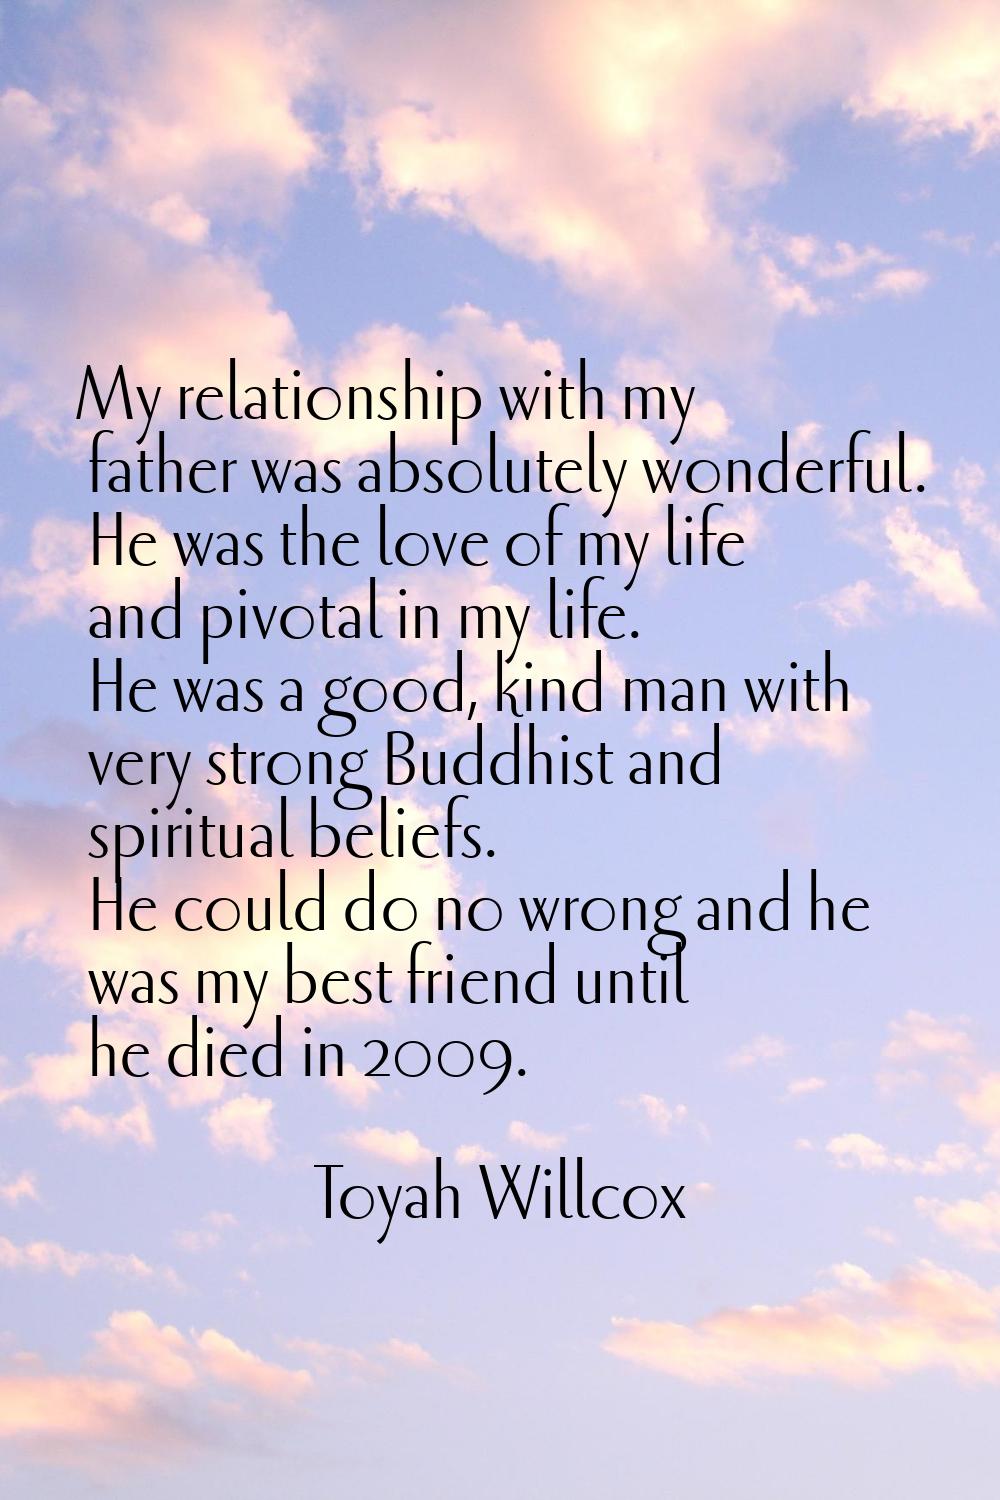 My relationship with my father was absolutely wonderful. He was the love of my life and pivotal in 